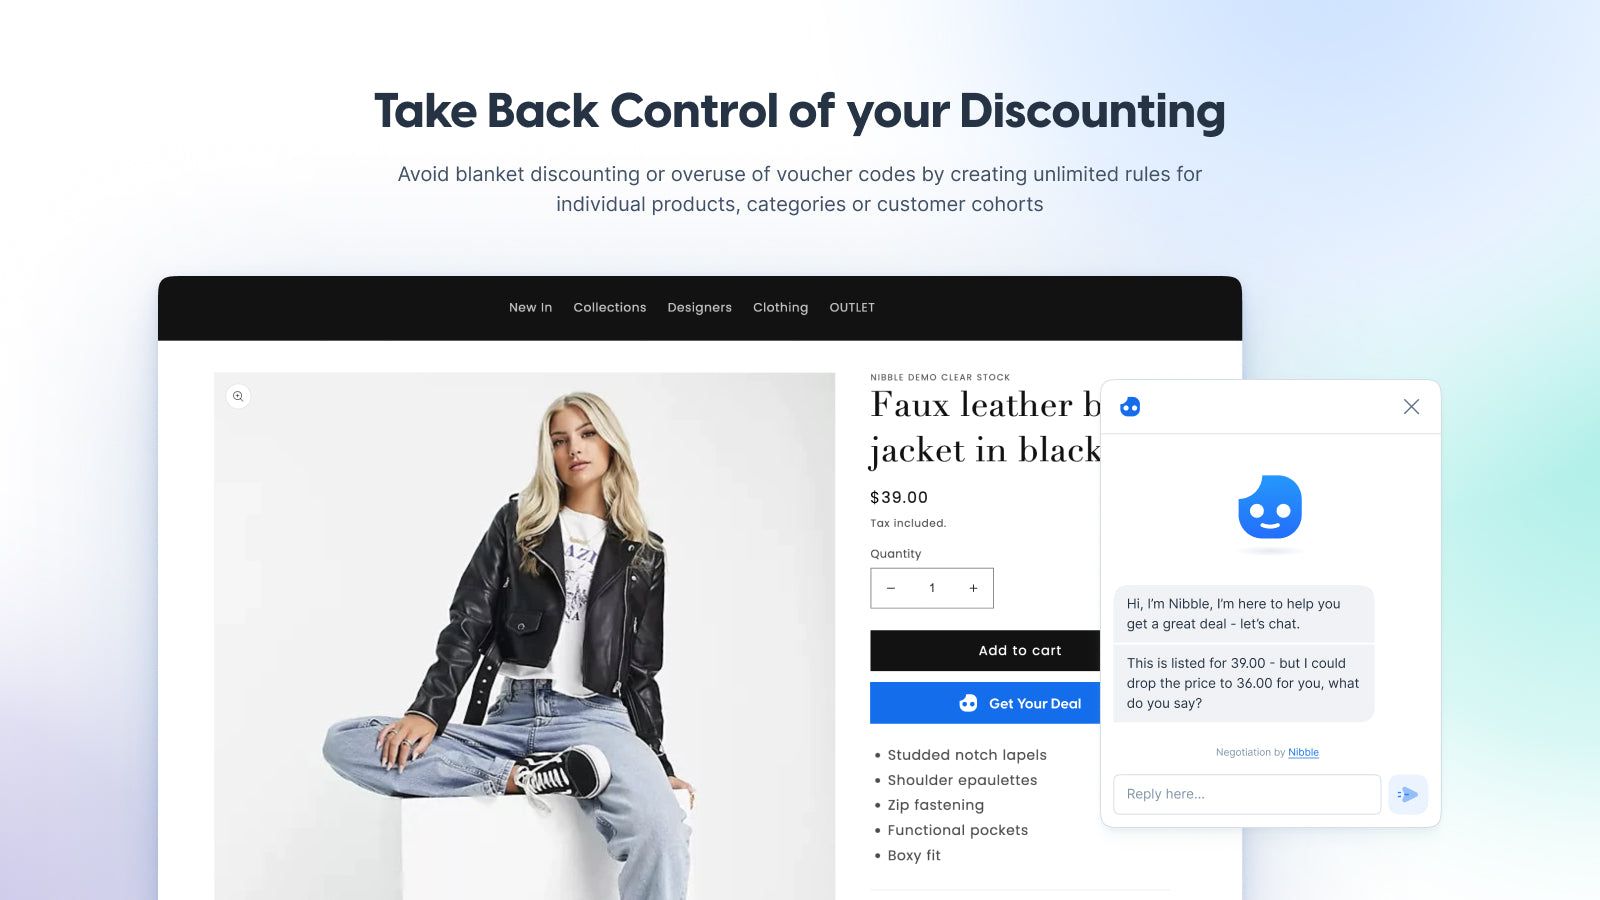 Control Your Discounting